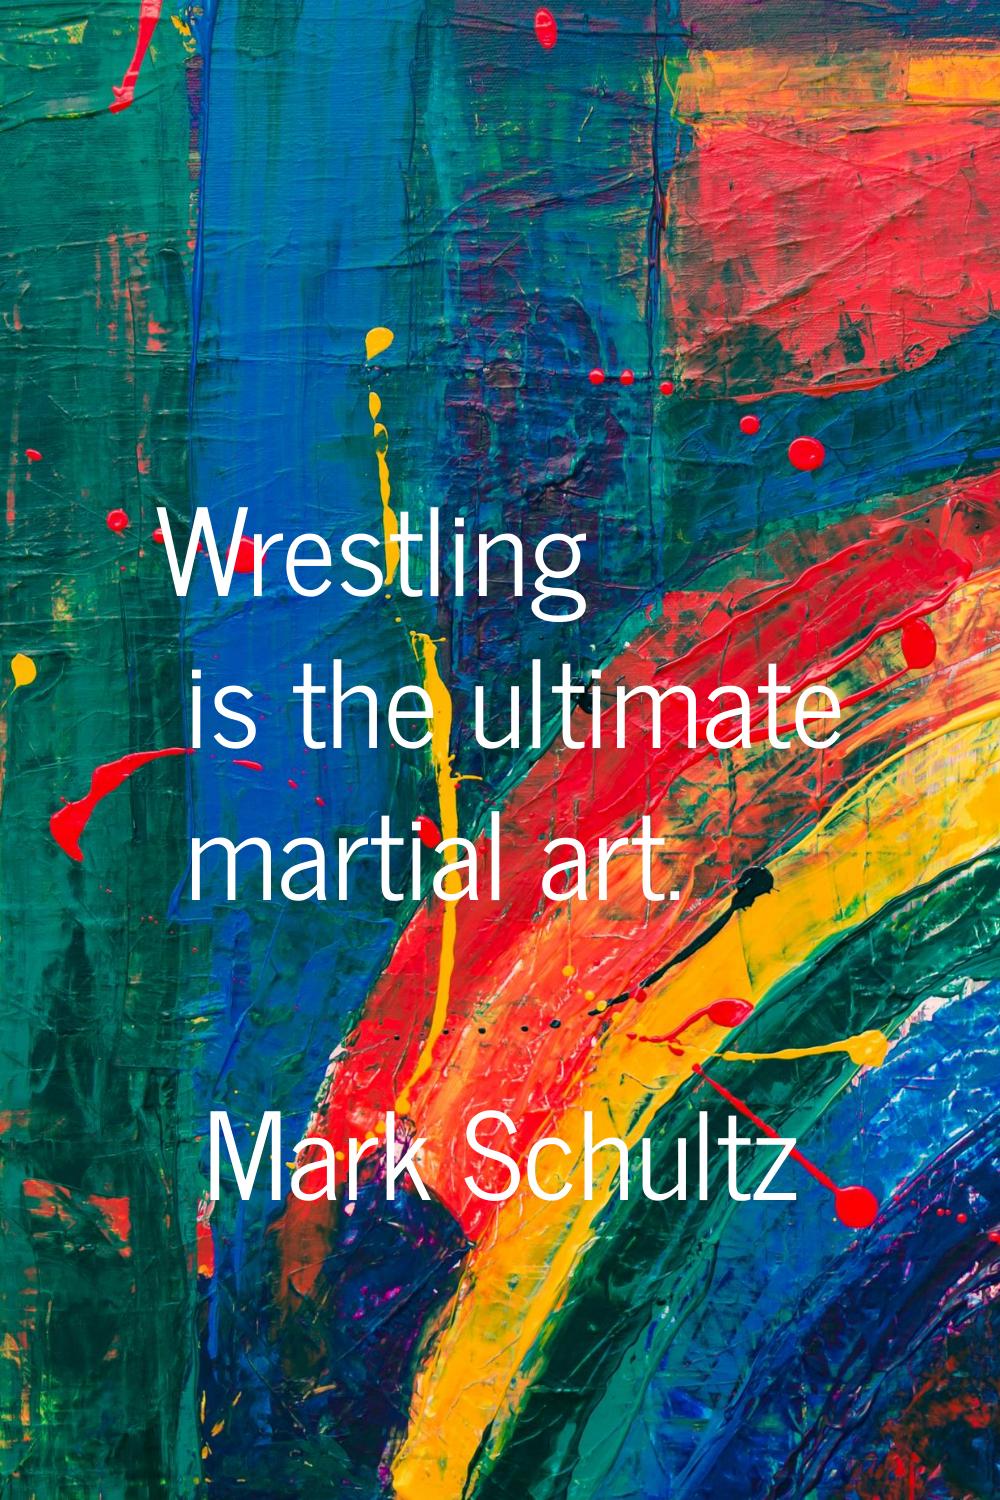 Wrestling is the ultimate martial art.